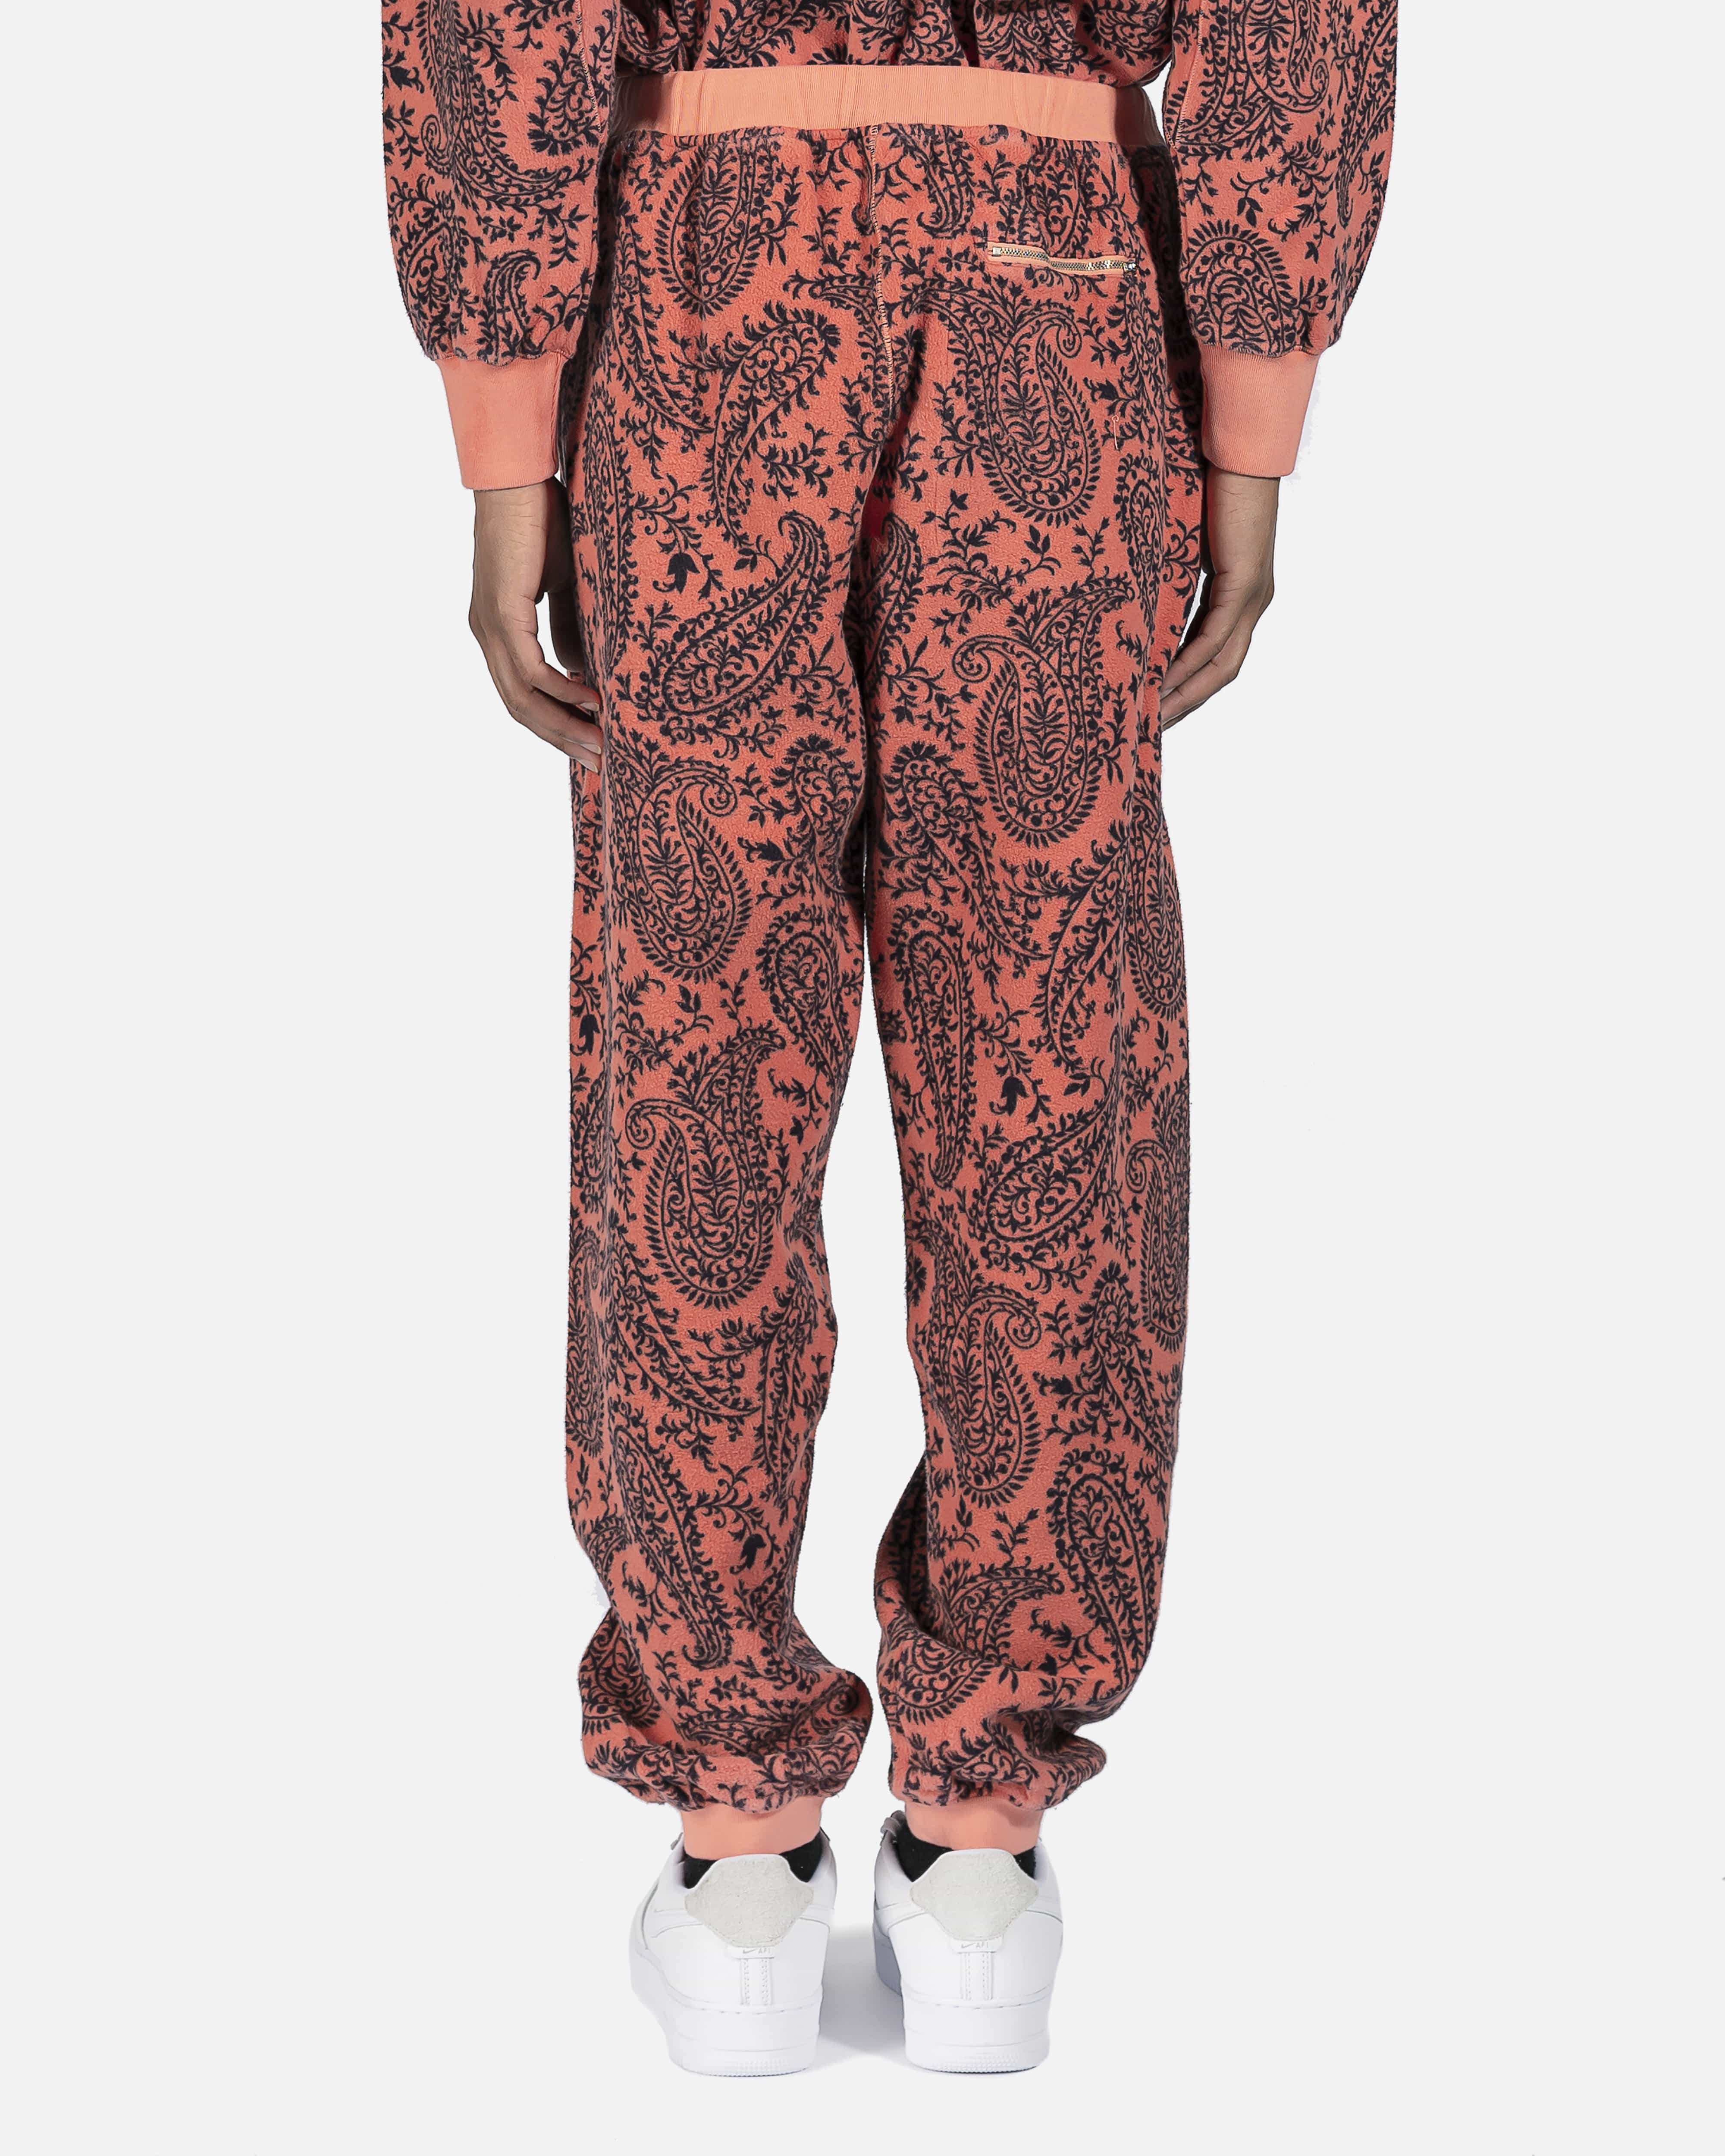 Urban Outfitters Archive Paisley Velvet Flare Trousers | Velvet flares,  Vintage outfits, Retro fashion